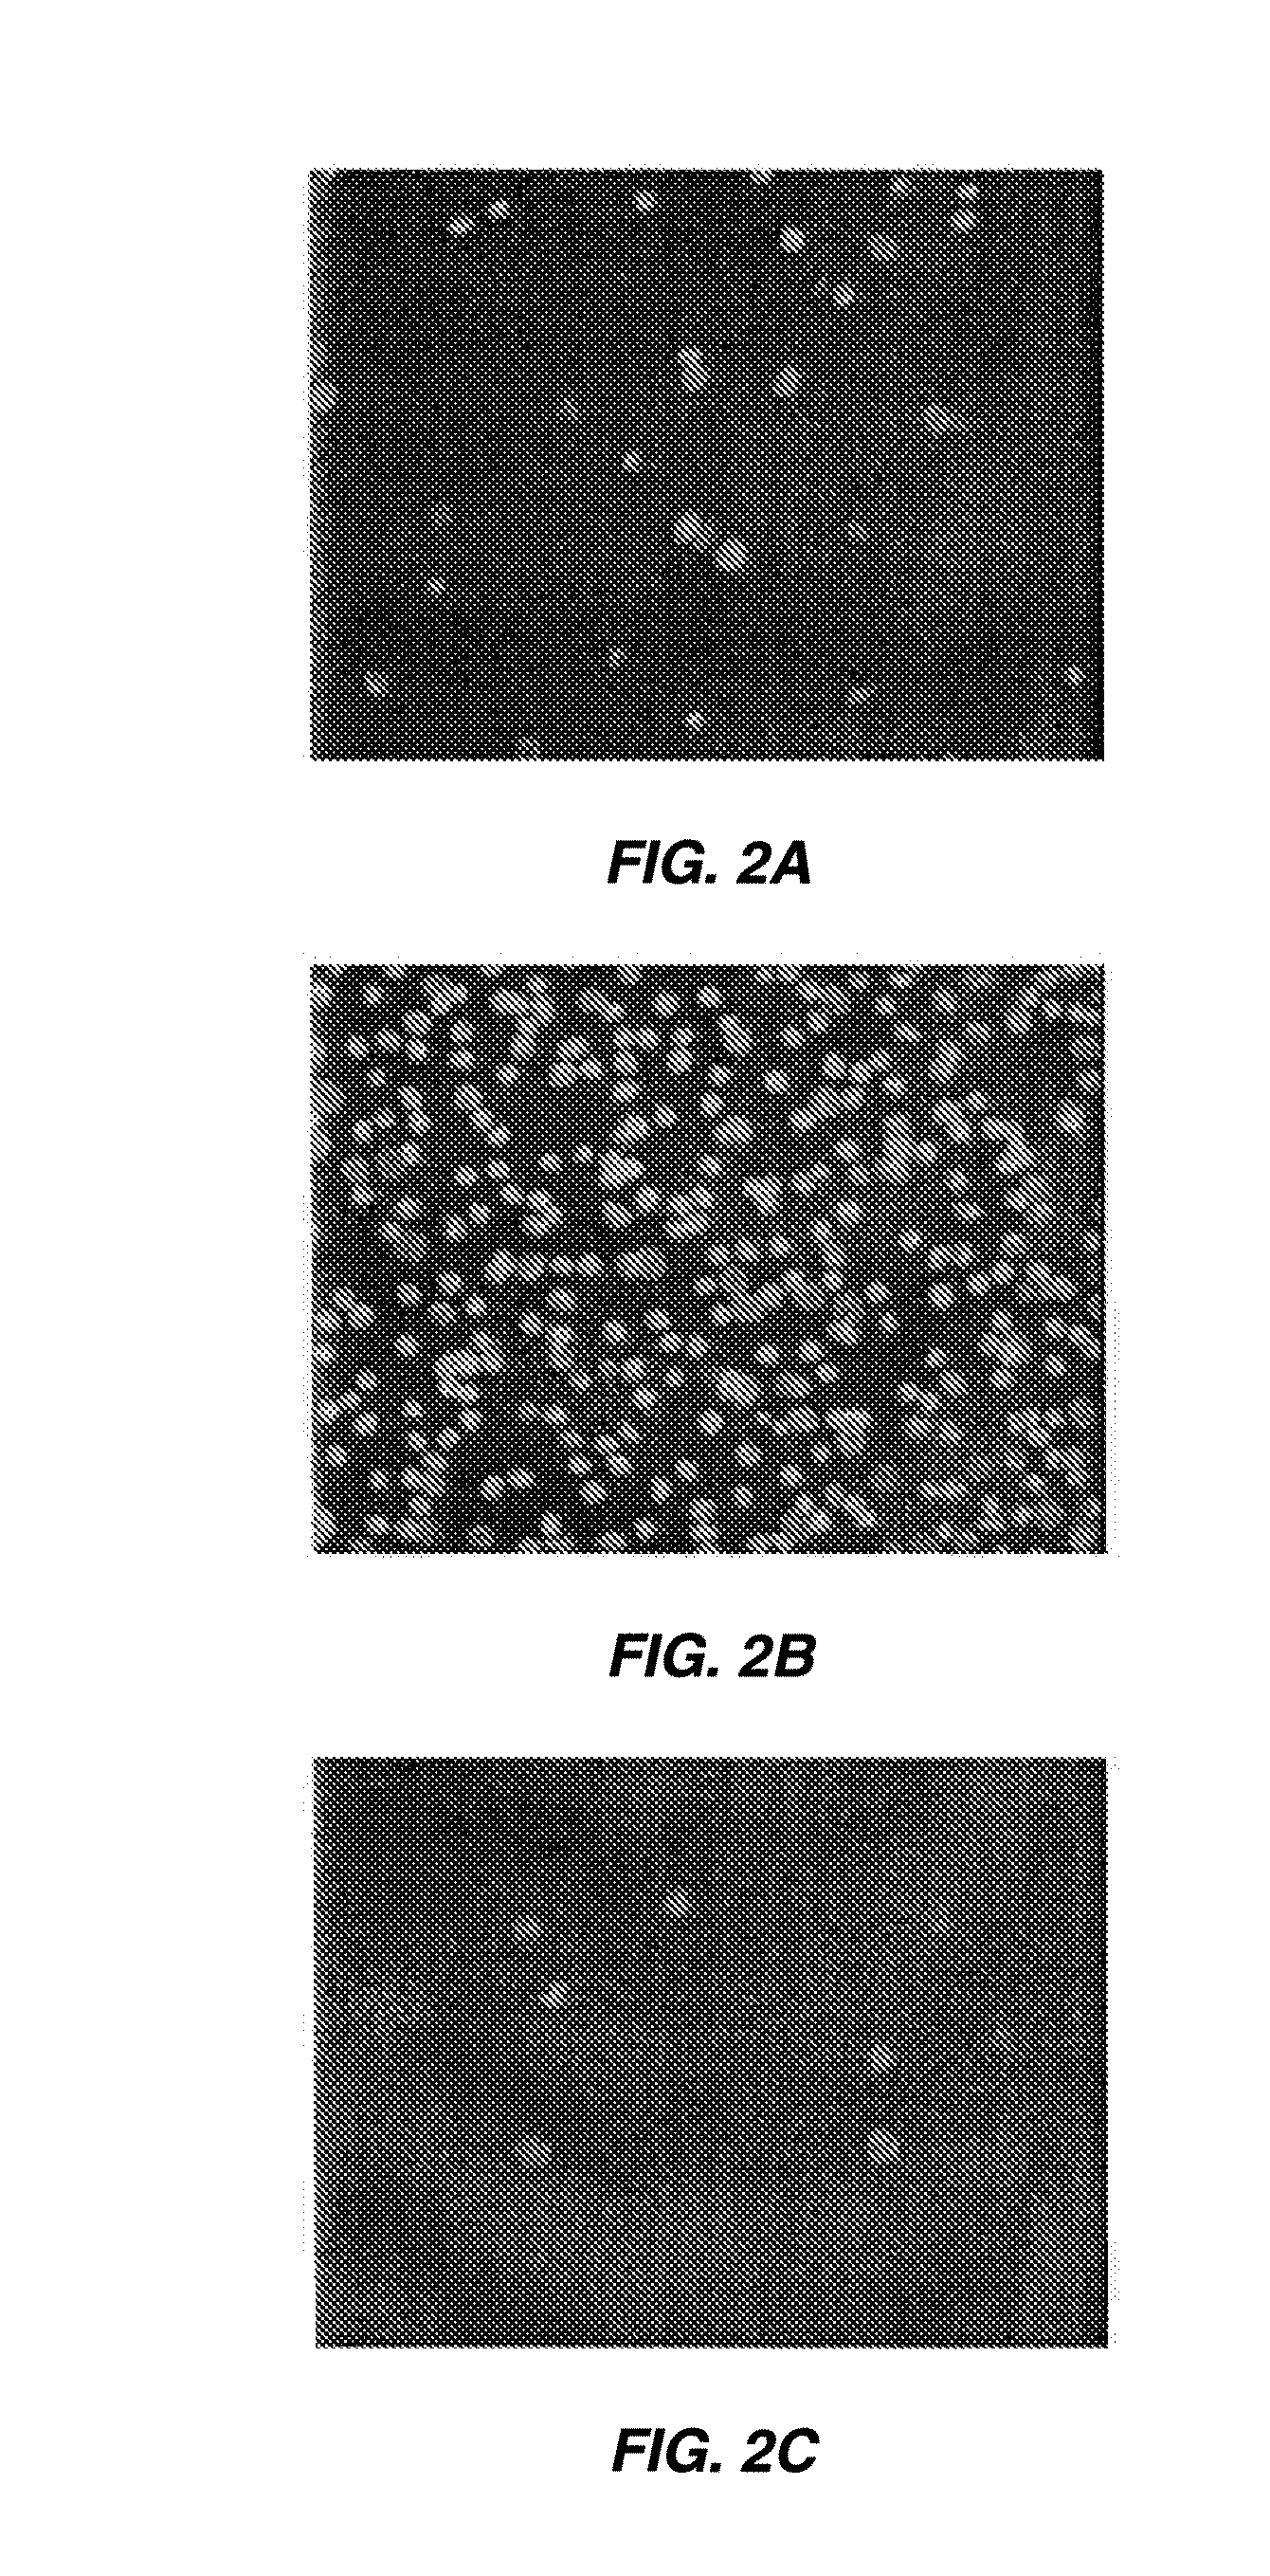 METHODS FOR PRODUCTION AND USE OF SUBSTANCE-LOADED ERYTHROCYTES (S-IEs) FOR OBSERVATION AND TREATMENT OF MICROVASCULAR HEMODYNAMICS